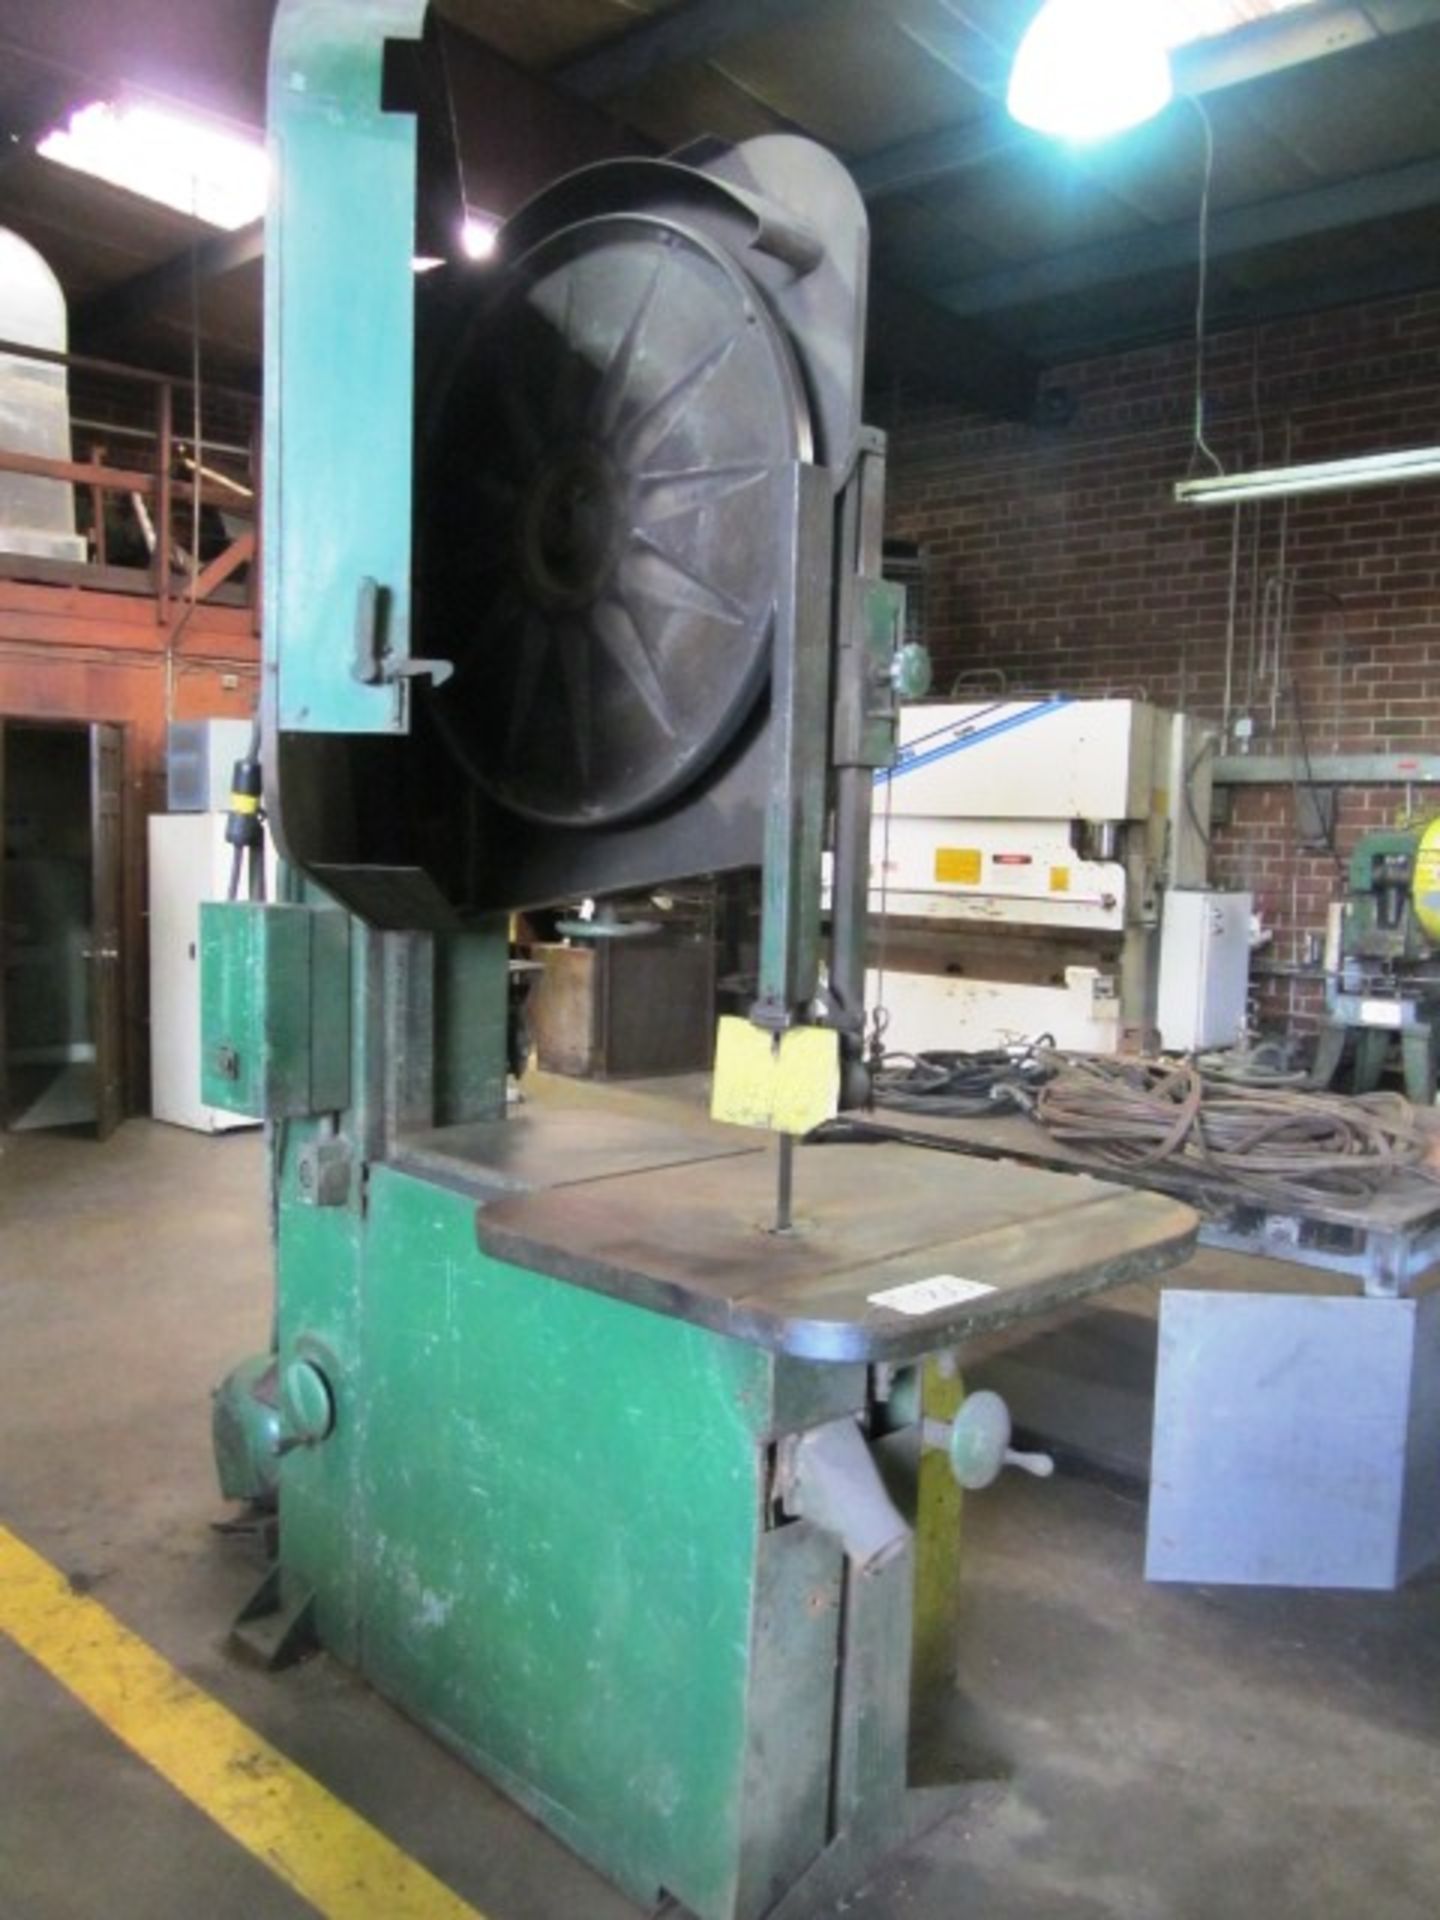 Do-All 35'' Vertical Bandsaw with 31'' x 36'' Worktable, Variable Blade Speeds, sn:31-50187 - Image 3 of 6